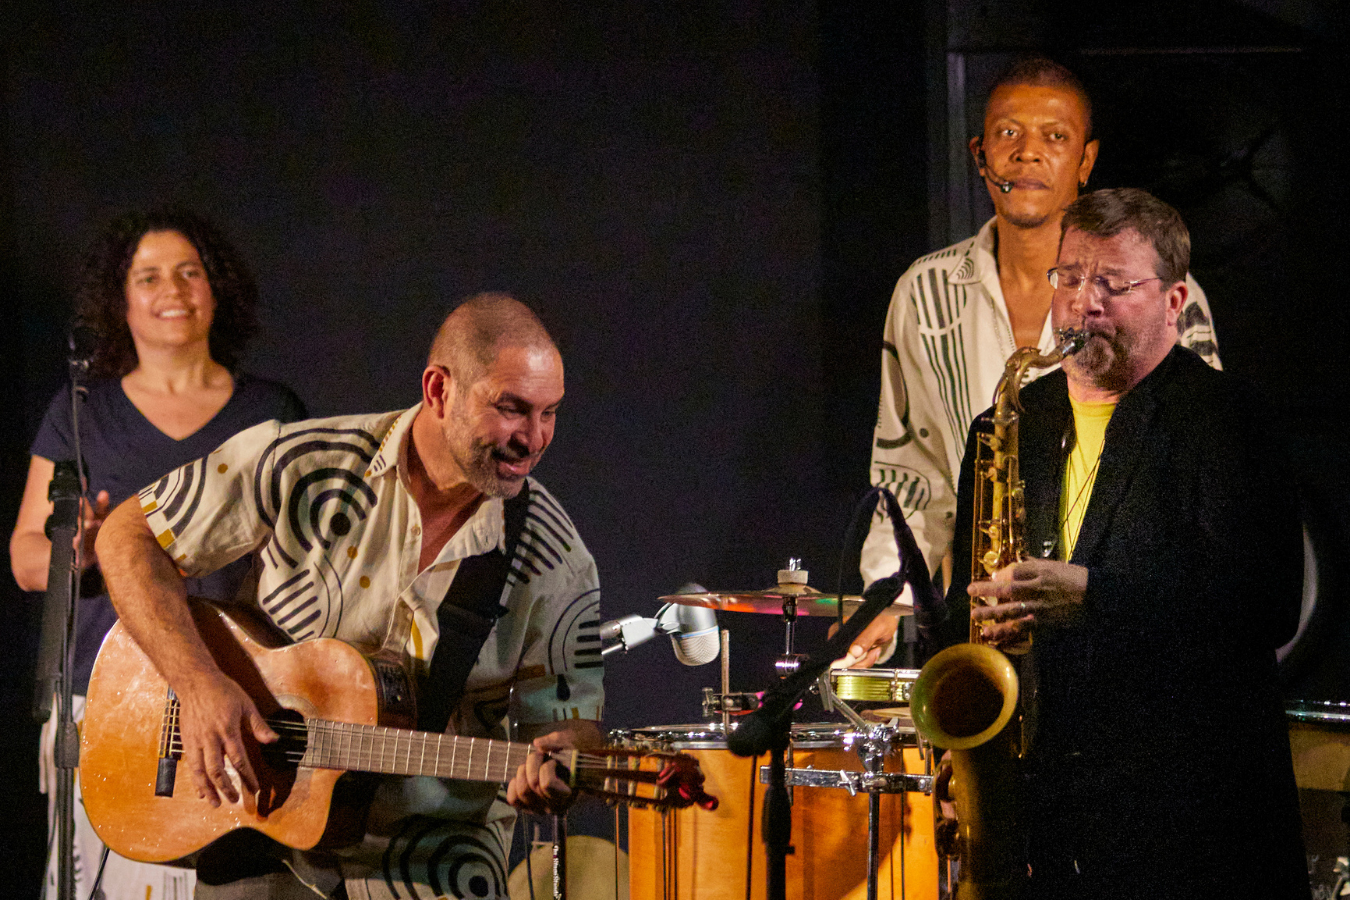 Paulo Padilha e Bando perform at the Princess Theater, joined on stage by local music teacher and saxophonist Dave Helms.